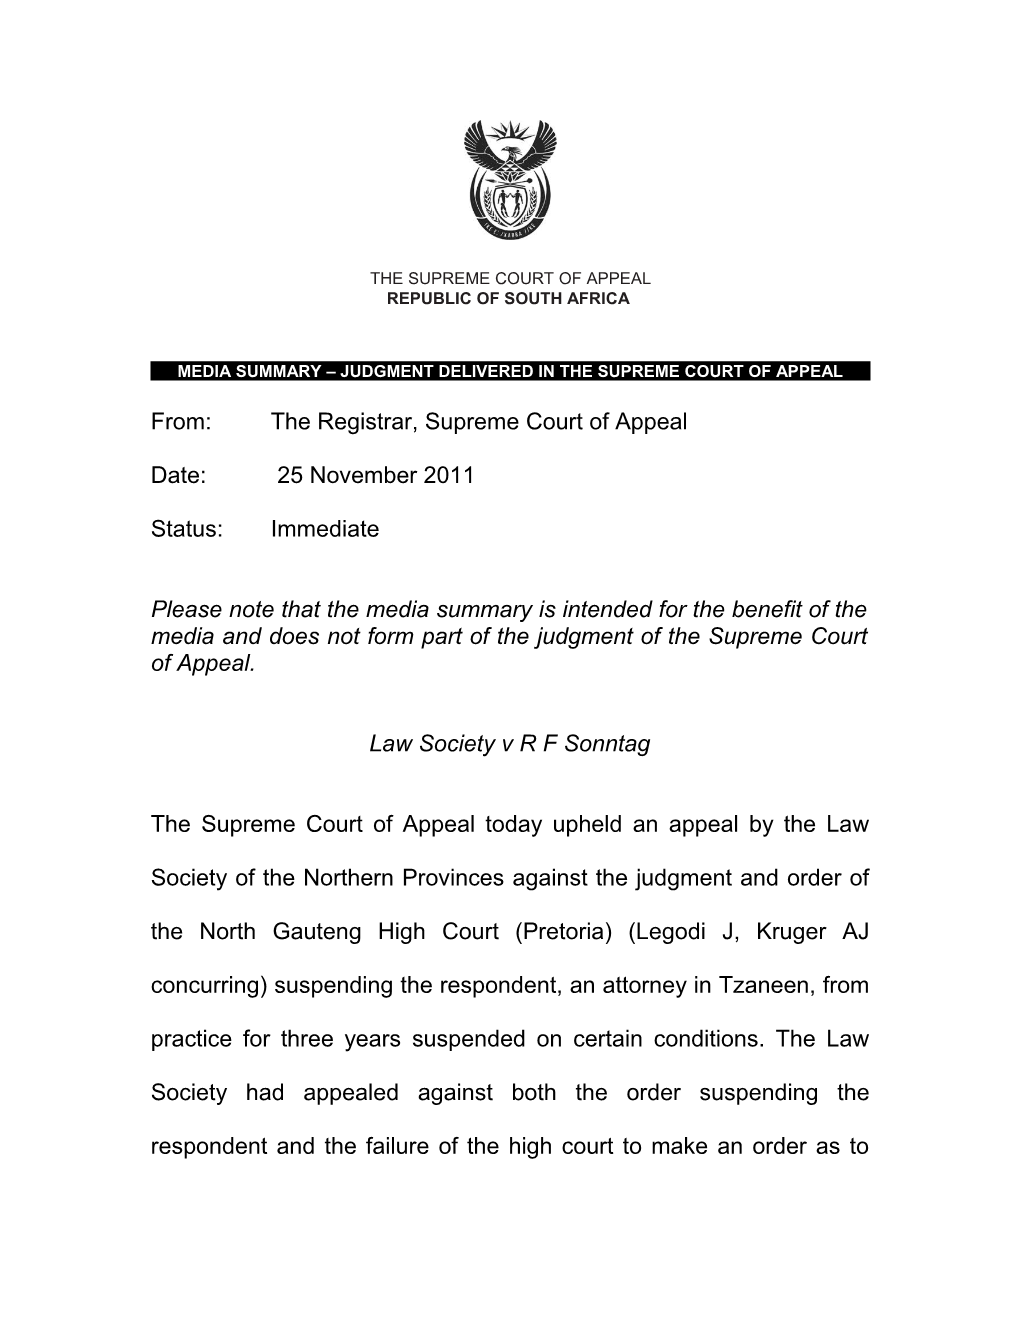 The Supreme Court of Appeal Today Upheld an Appeal by the Law Society of the Northern Provinces